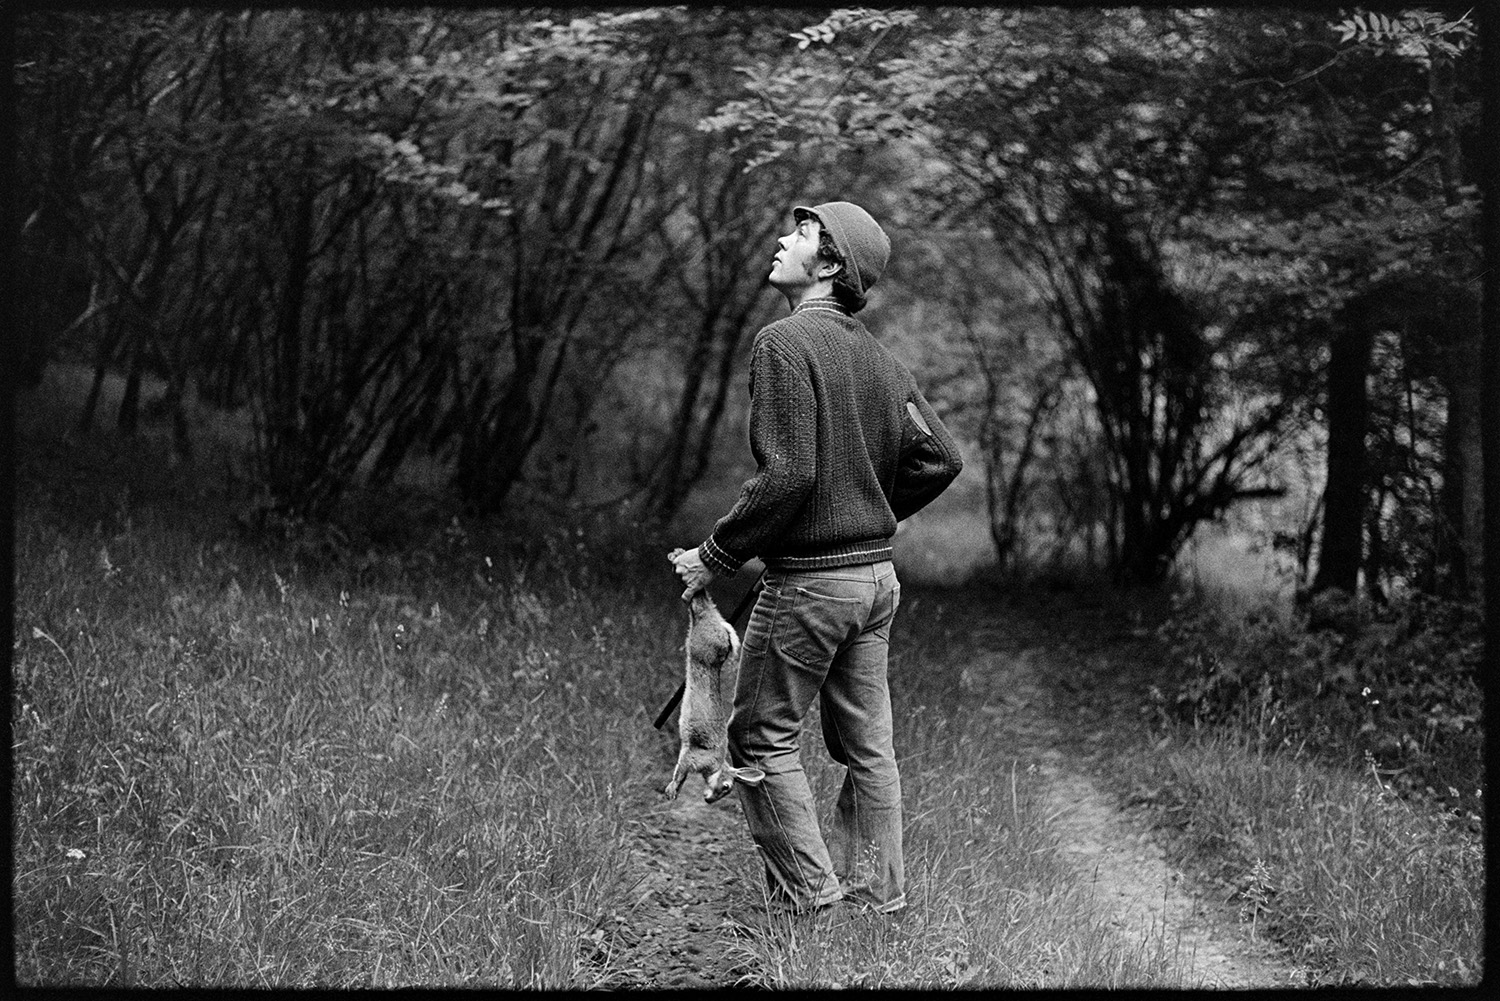 Farmer shooting squirrels. Shotgun. 
[David Ward looking up into trees from a track at Parsonage, Iddesleigh, looking for squirrels to shoot. He is holding a shotgun and a dead rabbit.]